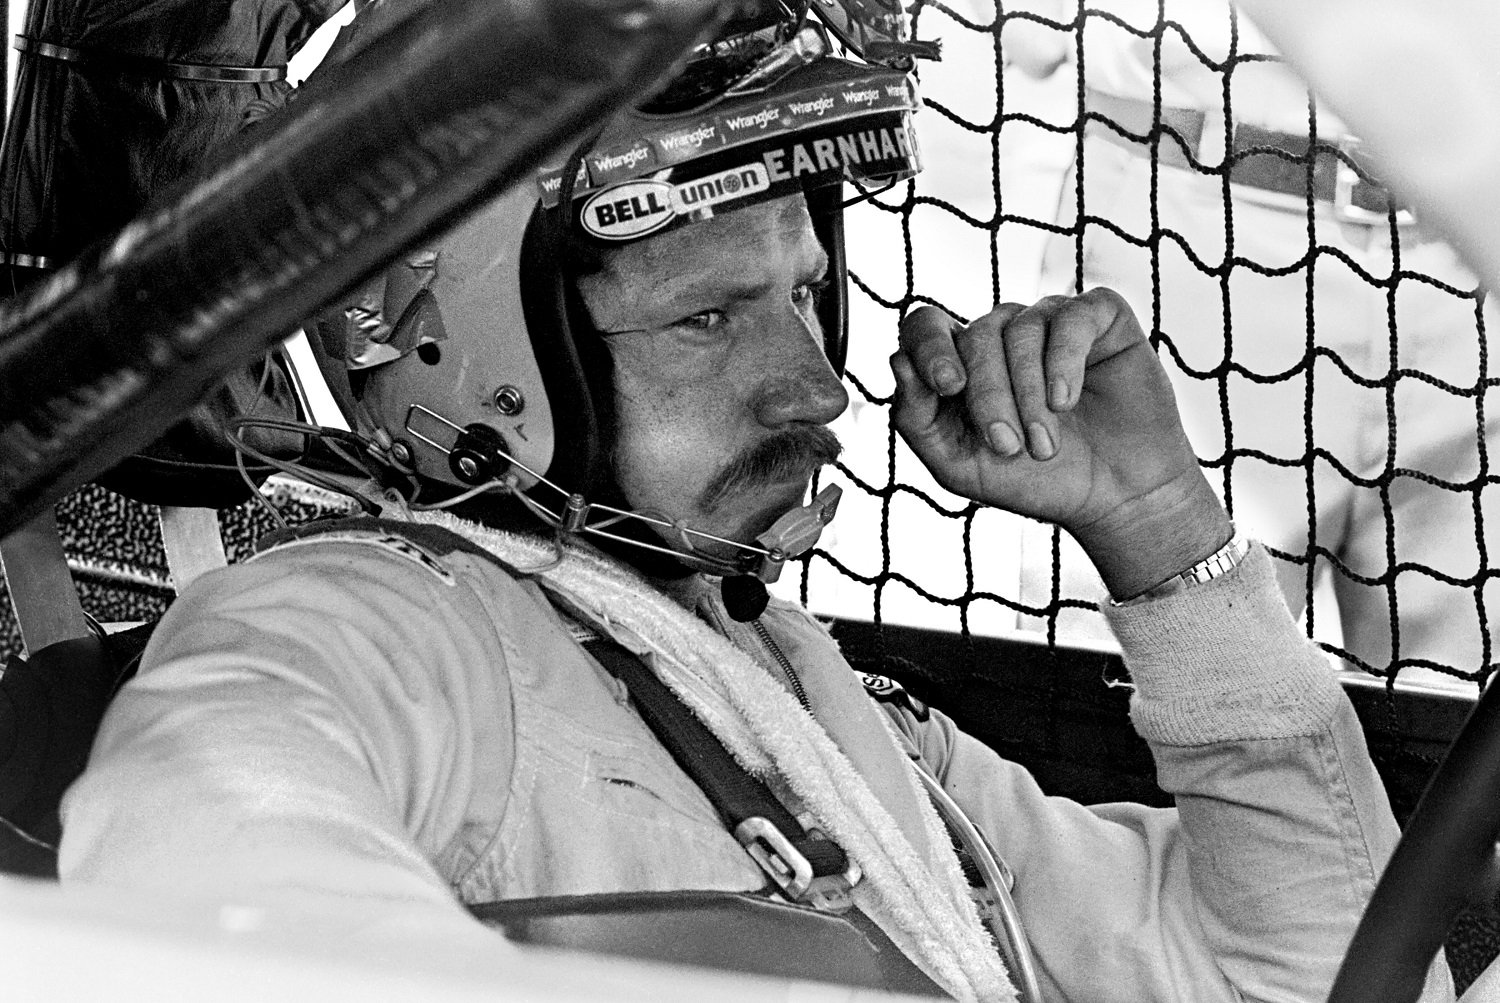 NASCAR driver Dale Earnhardt Sr. sits in his car while it is repaired after an accident during the Firecracker 400 on July 4, 1981 at the Daytona International Speedway.